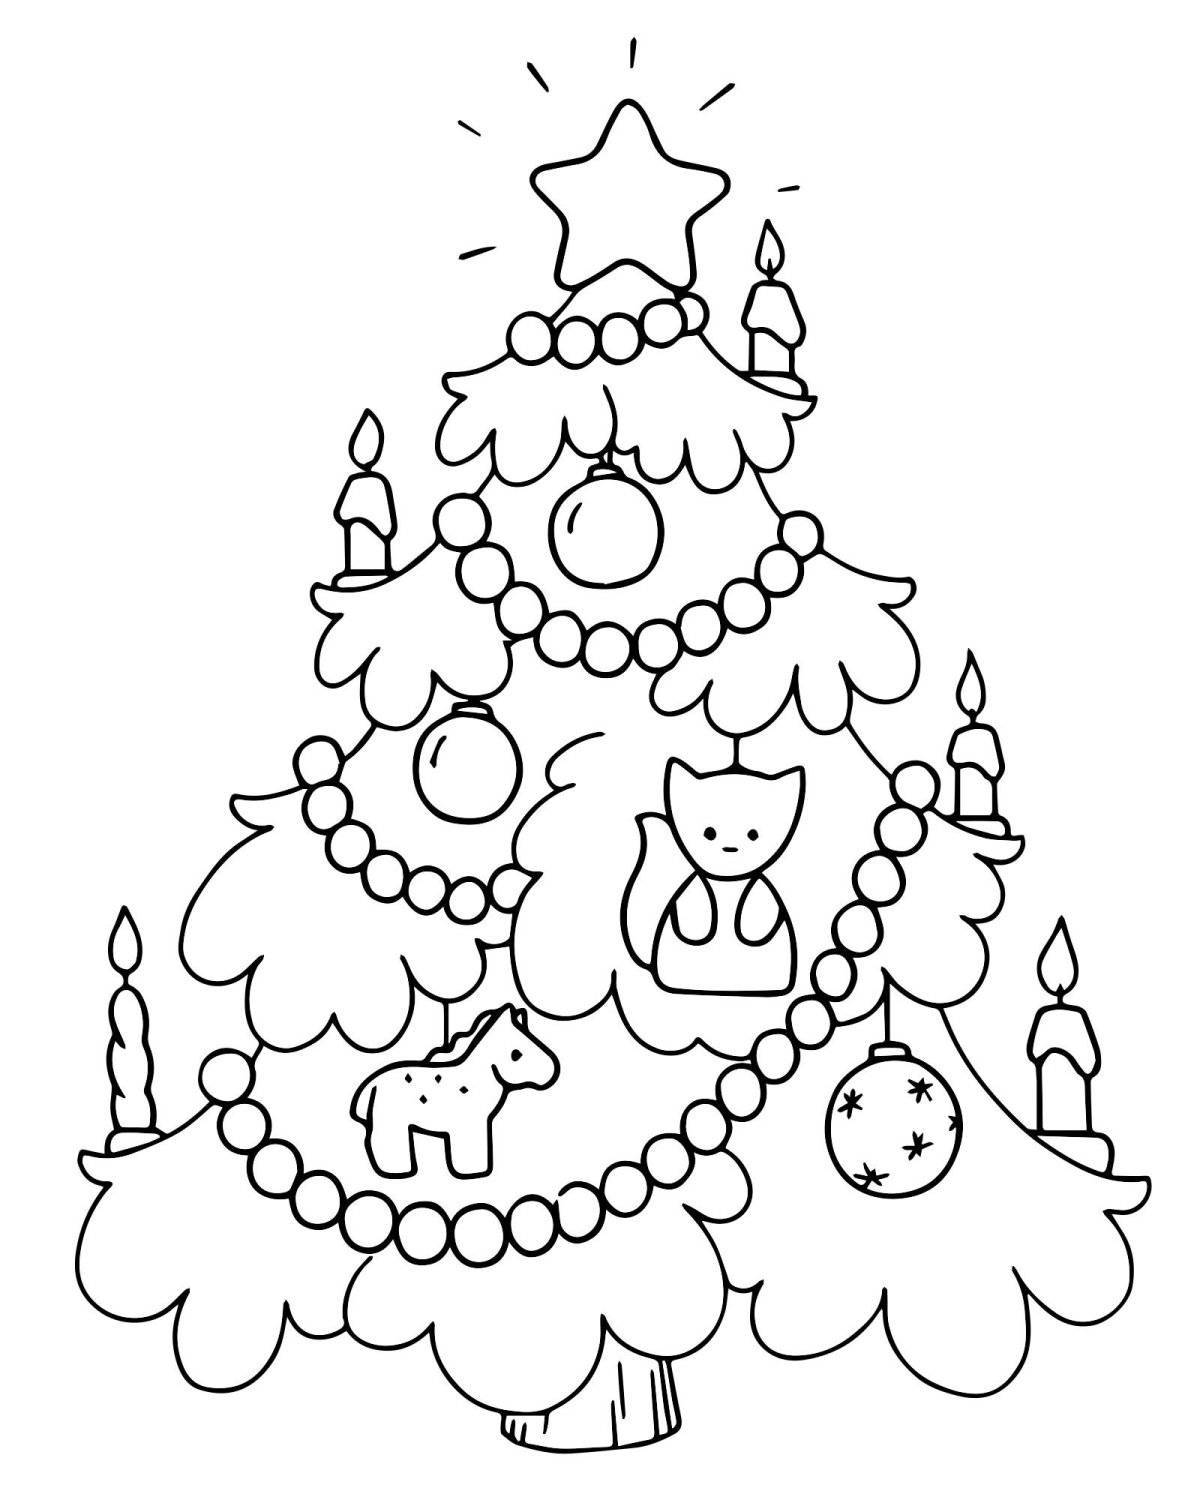 Exquisite Christmas tree with toys